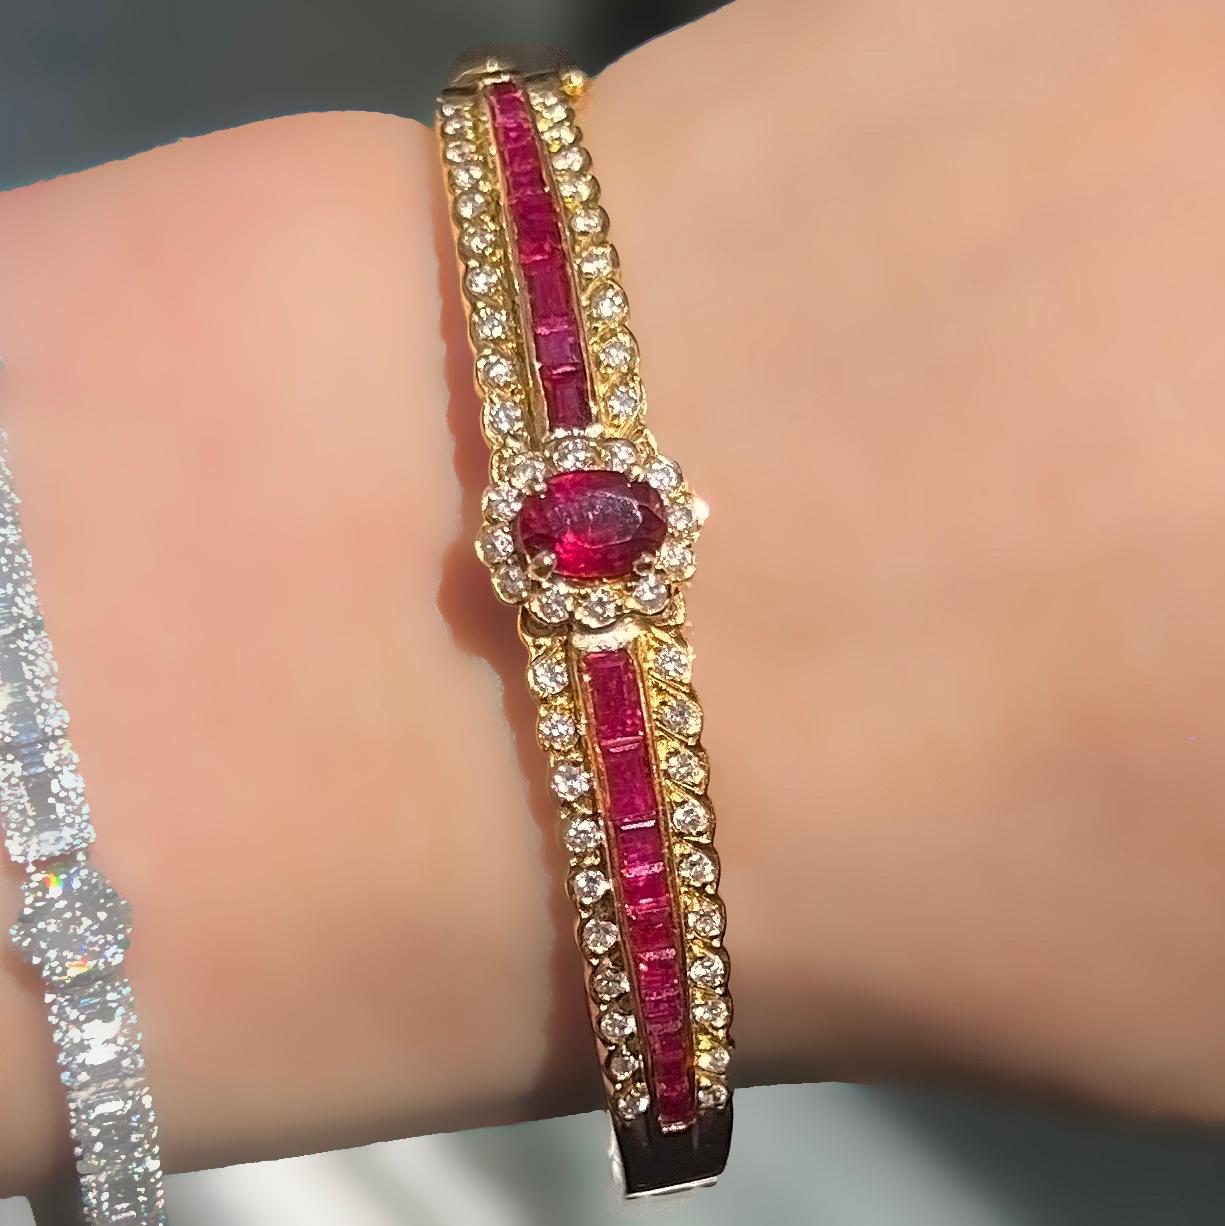 18-karat yellow gold vintage estate ruby and diamond retro-hinged bangle bracelet.
The center stone is an oval-shaped red ruby. Delicately handset and cut are invisibly set baguette-shaped ruby gemstones. The beauty of these rubies is the slight